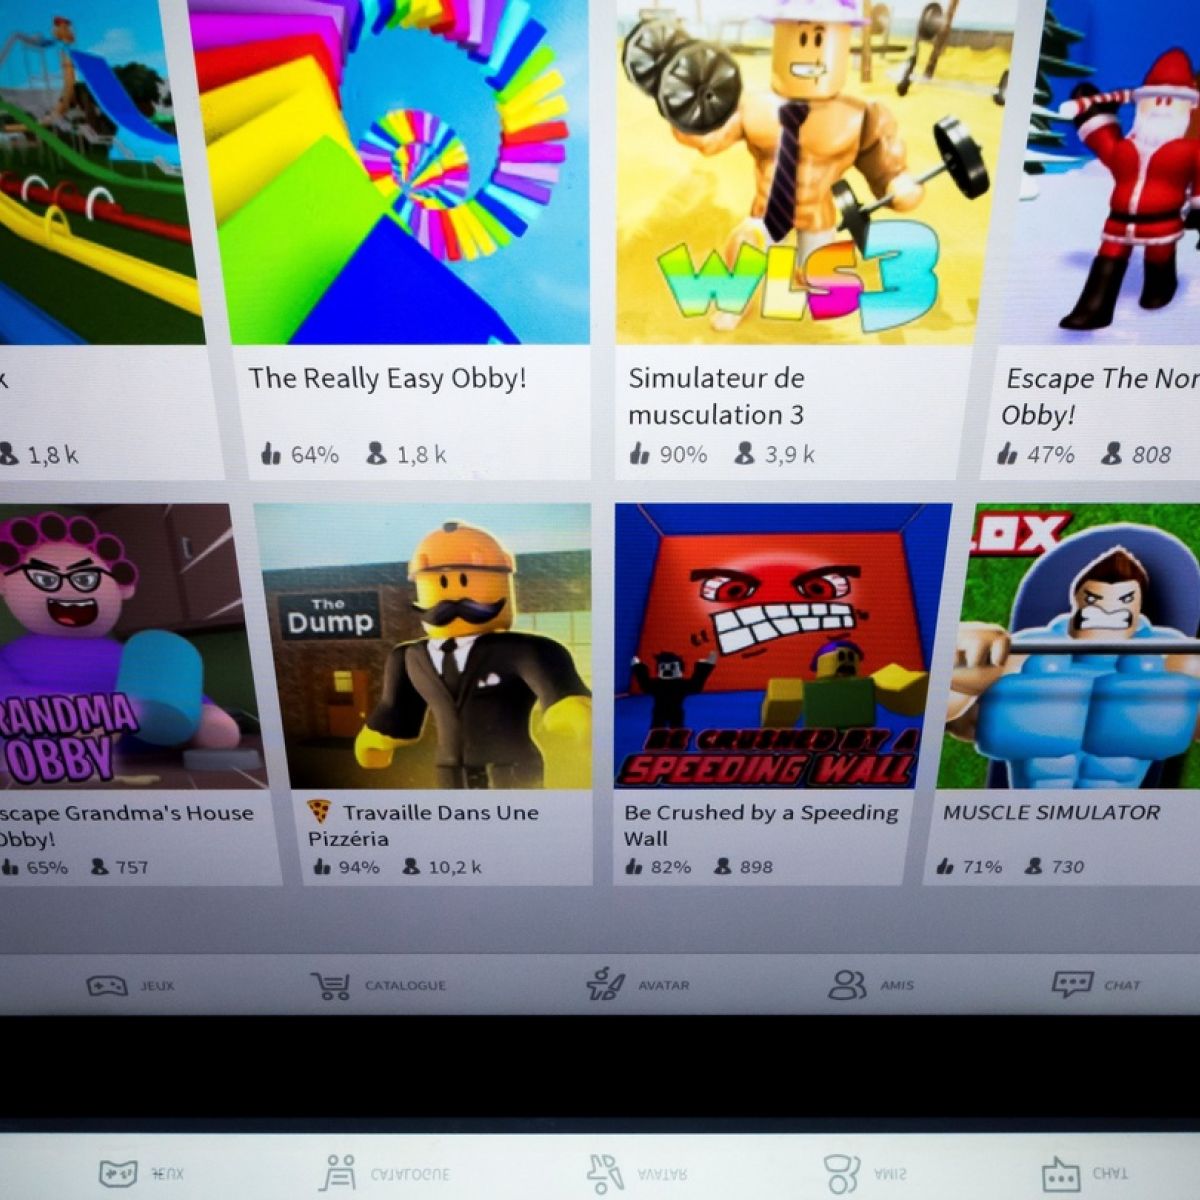 Numbers Playing Preteen Video Game Roblox Surge During Covid 19 Lockdowns - is design it available on xbox roblox